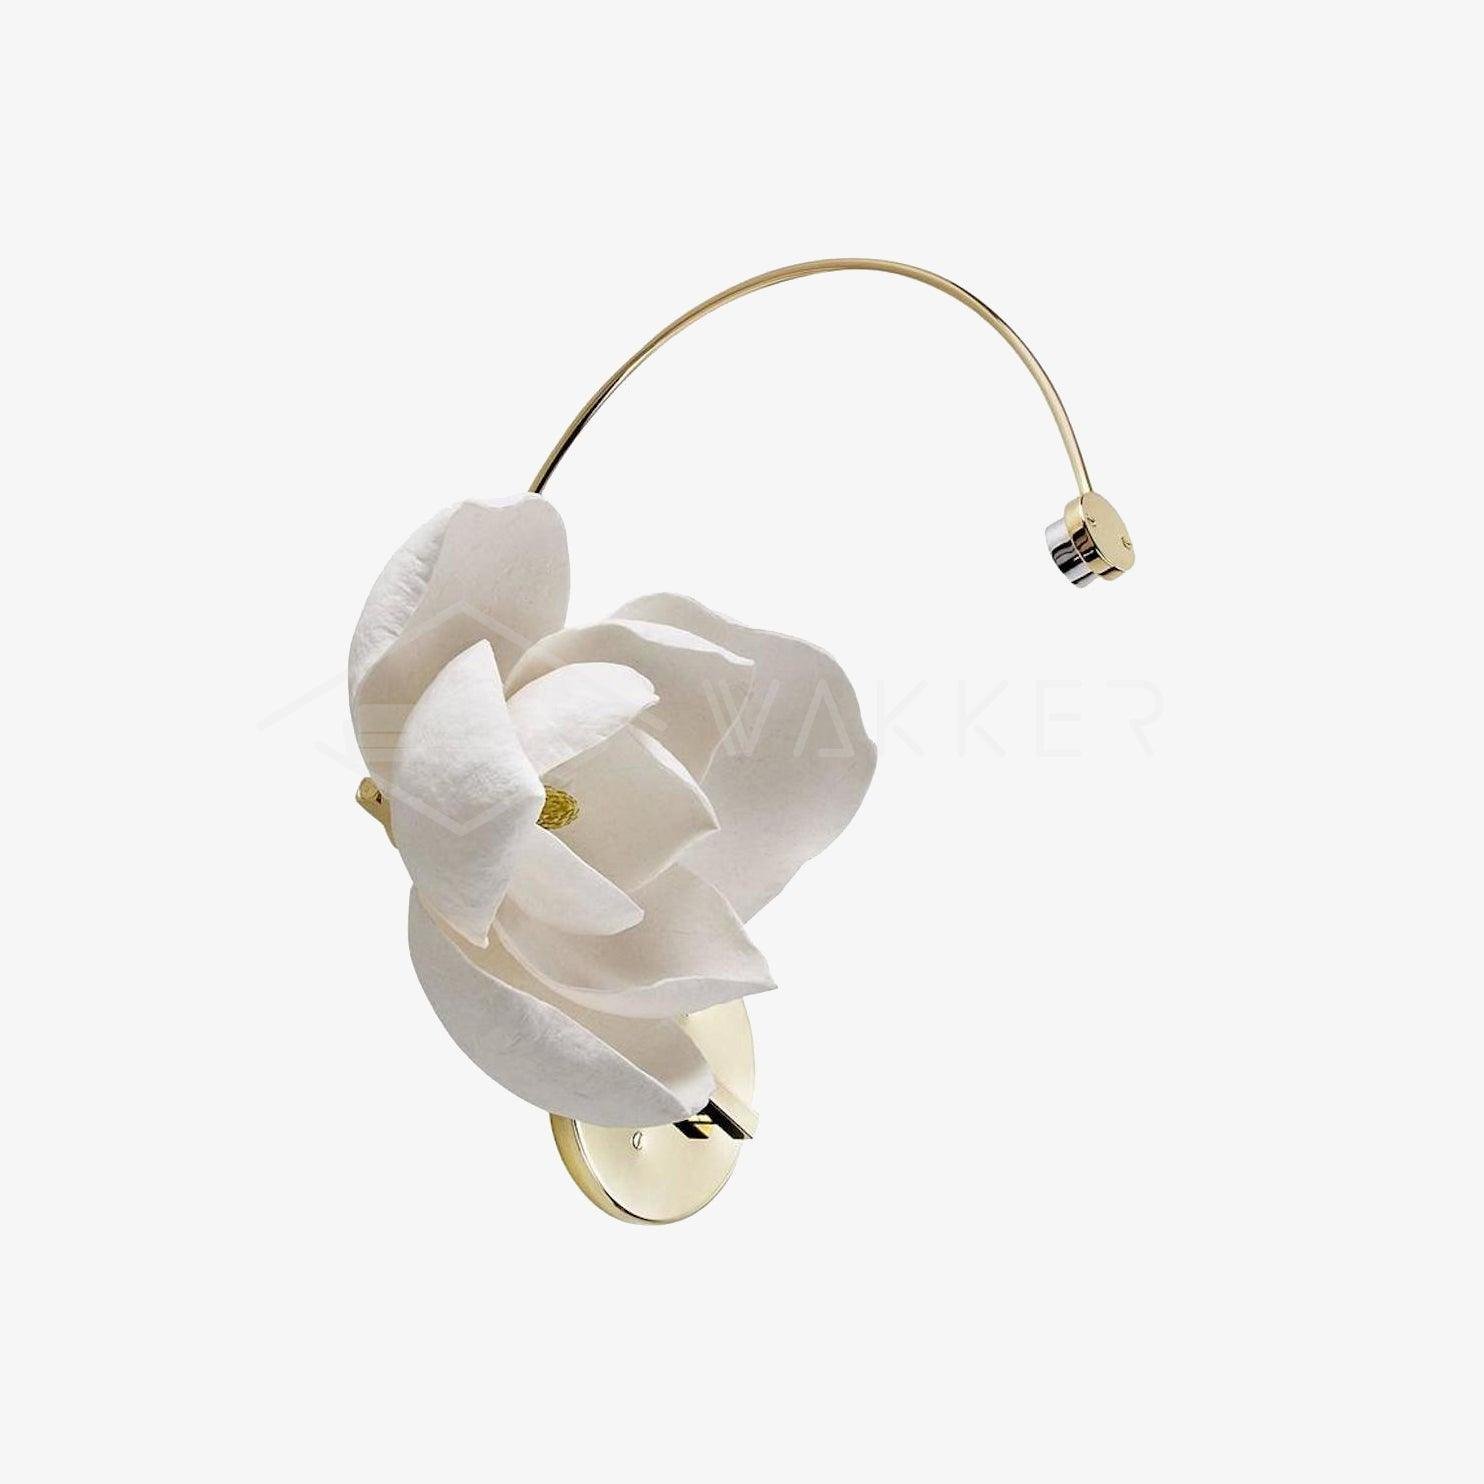 White Lure Sconce featuring Cool White Lighting, with a diameter of 10 inches and a height of 7.5 inches (25.5cm x 19cm).